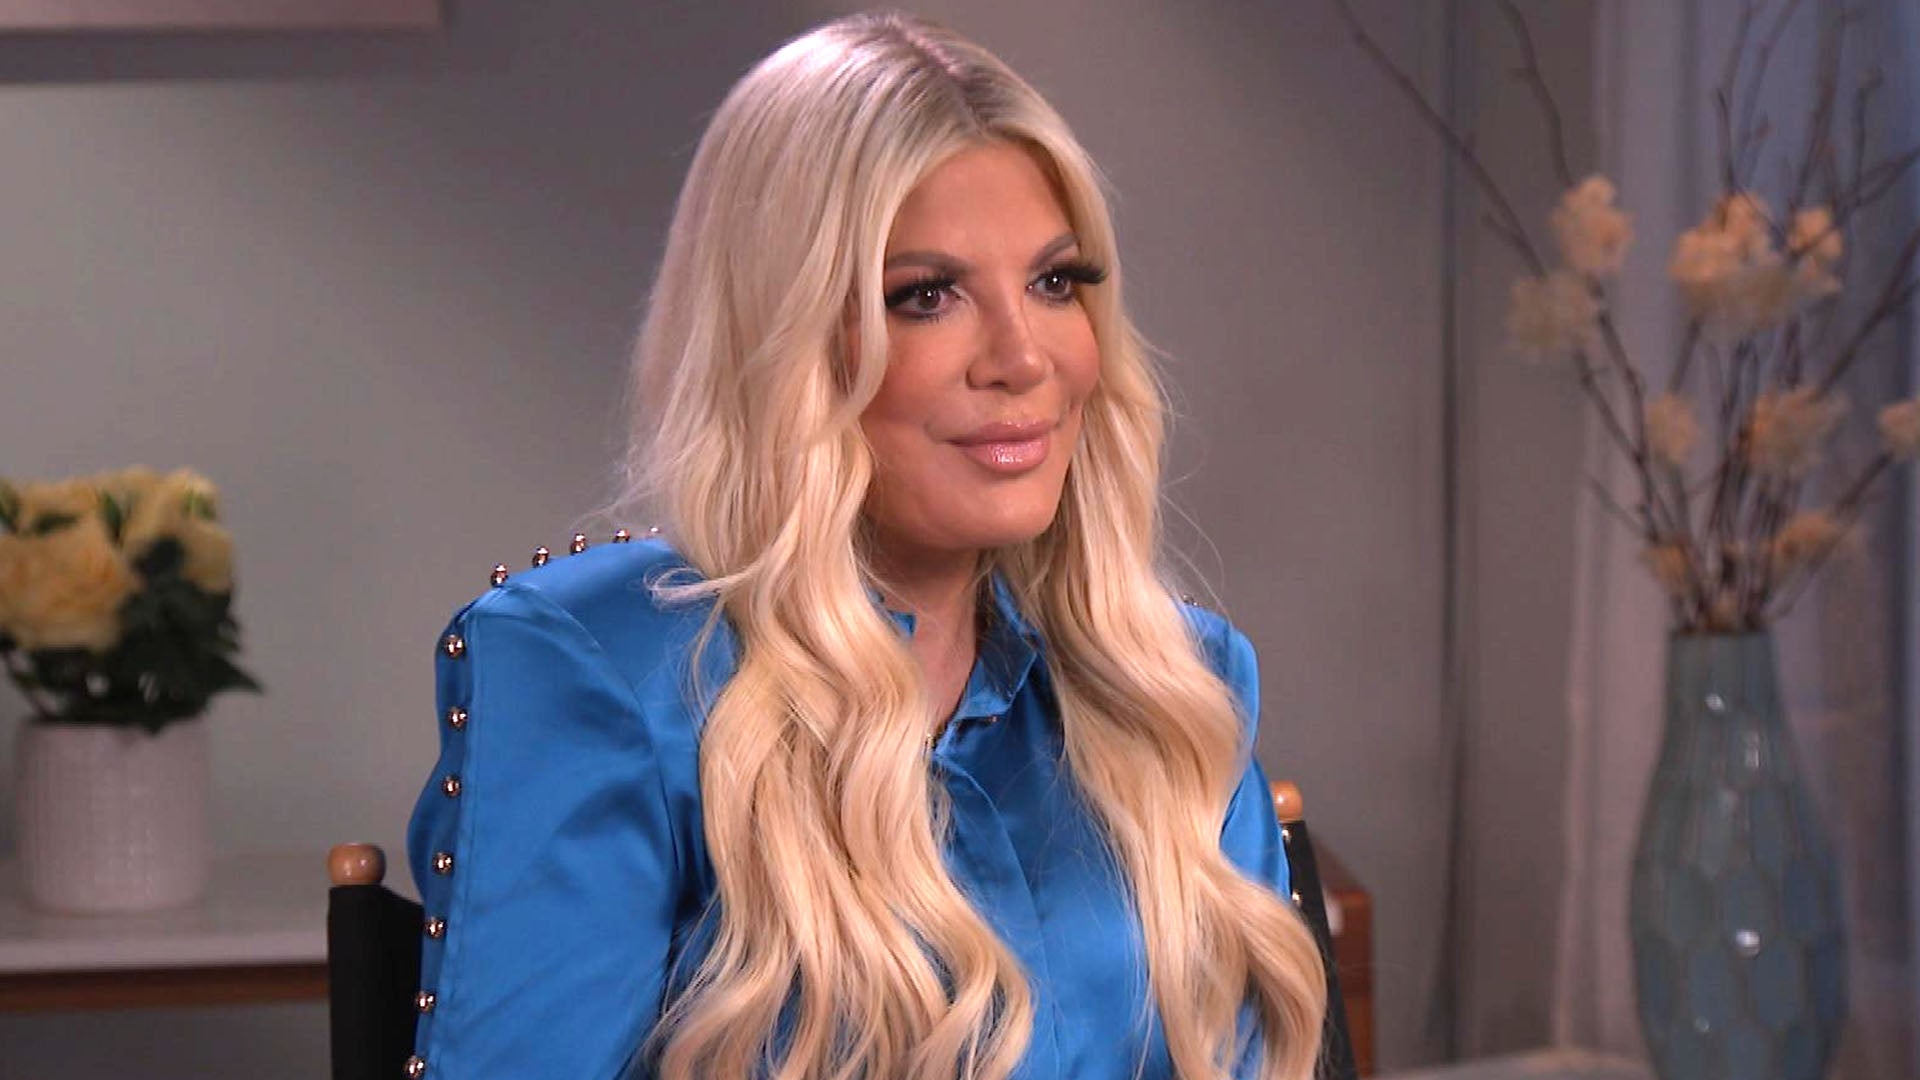 Tori Spelling on Her ‘Thick Skin’ Approach to Tabloid Attention About Her Marriage (Exclusive)